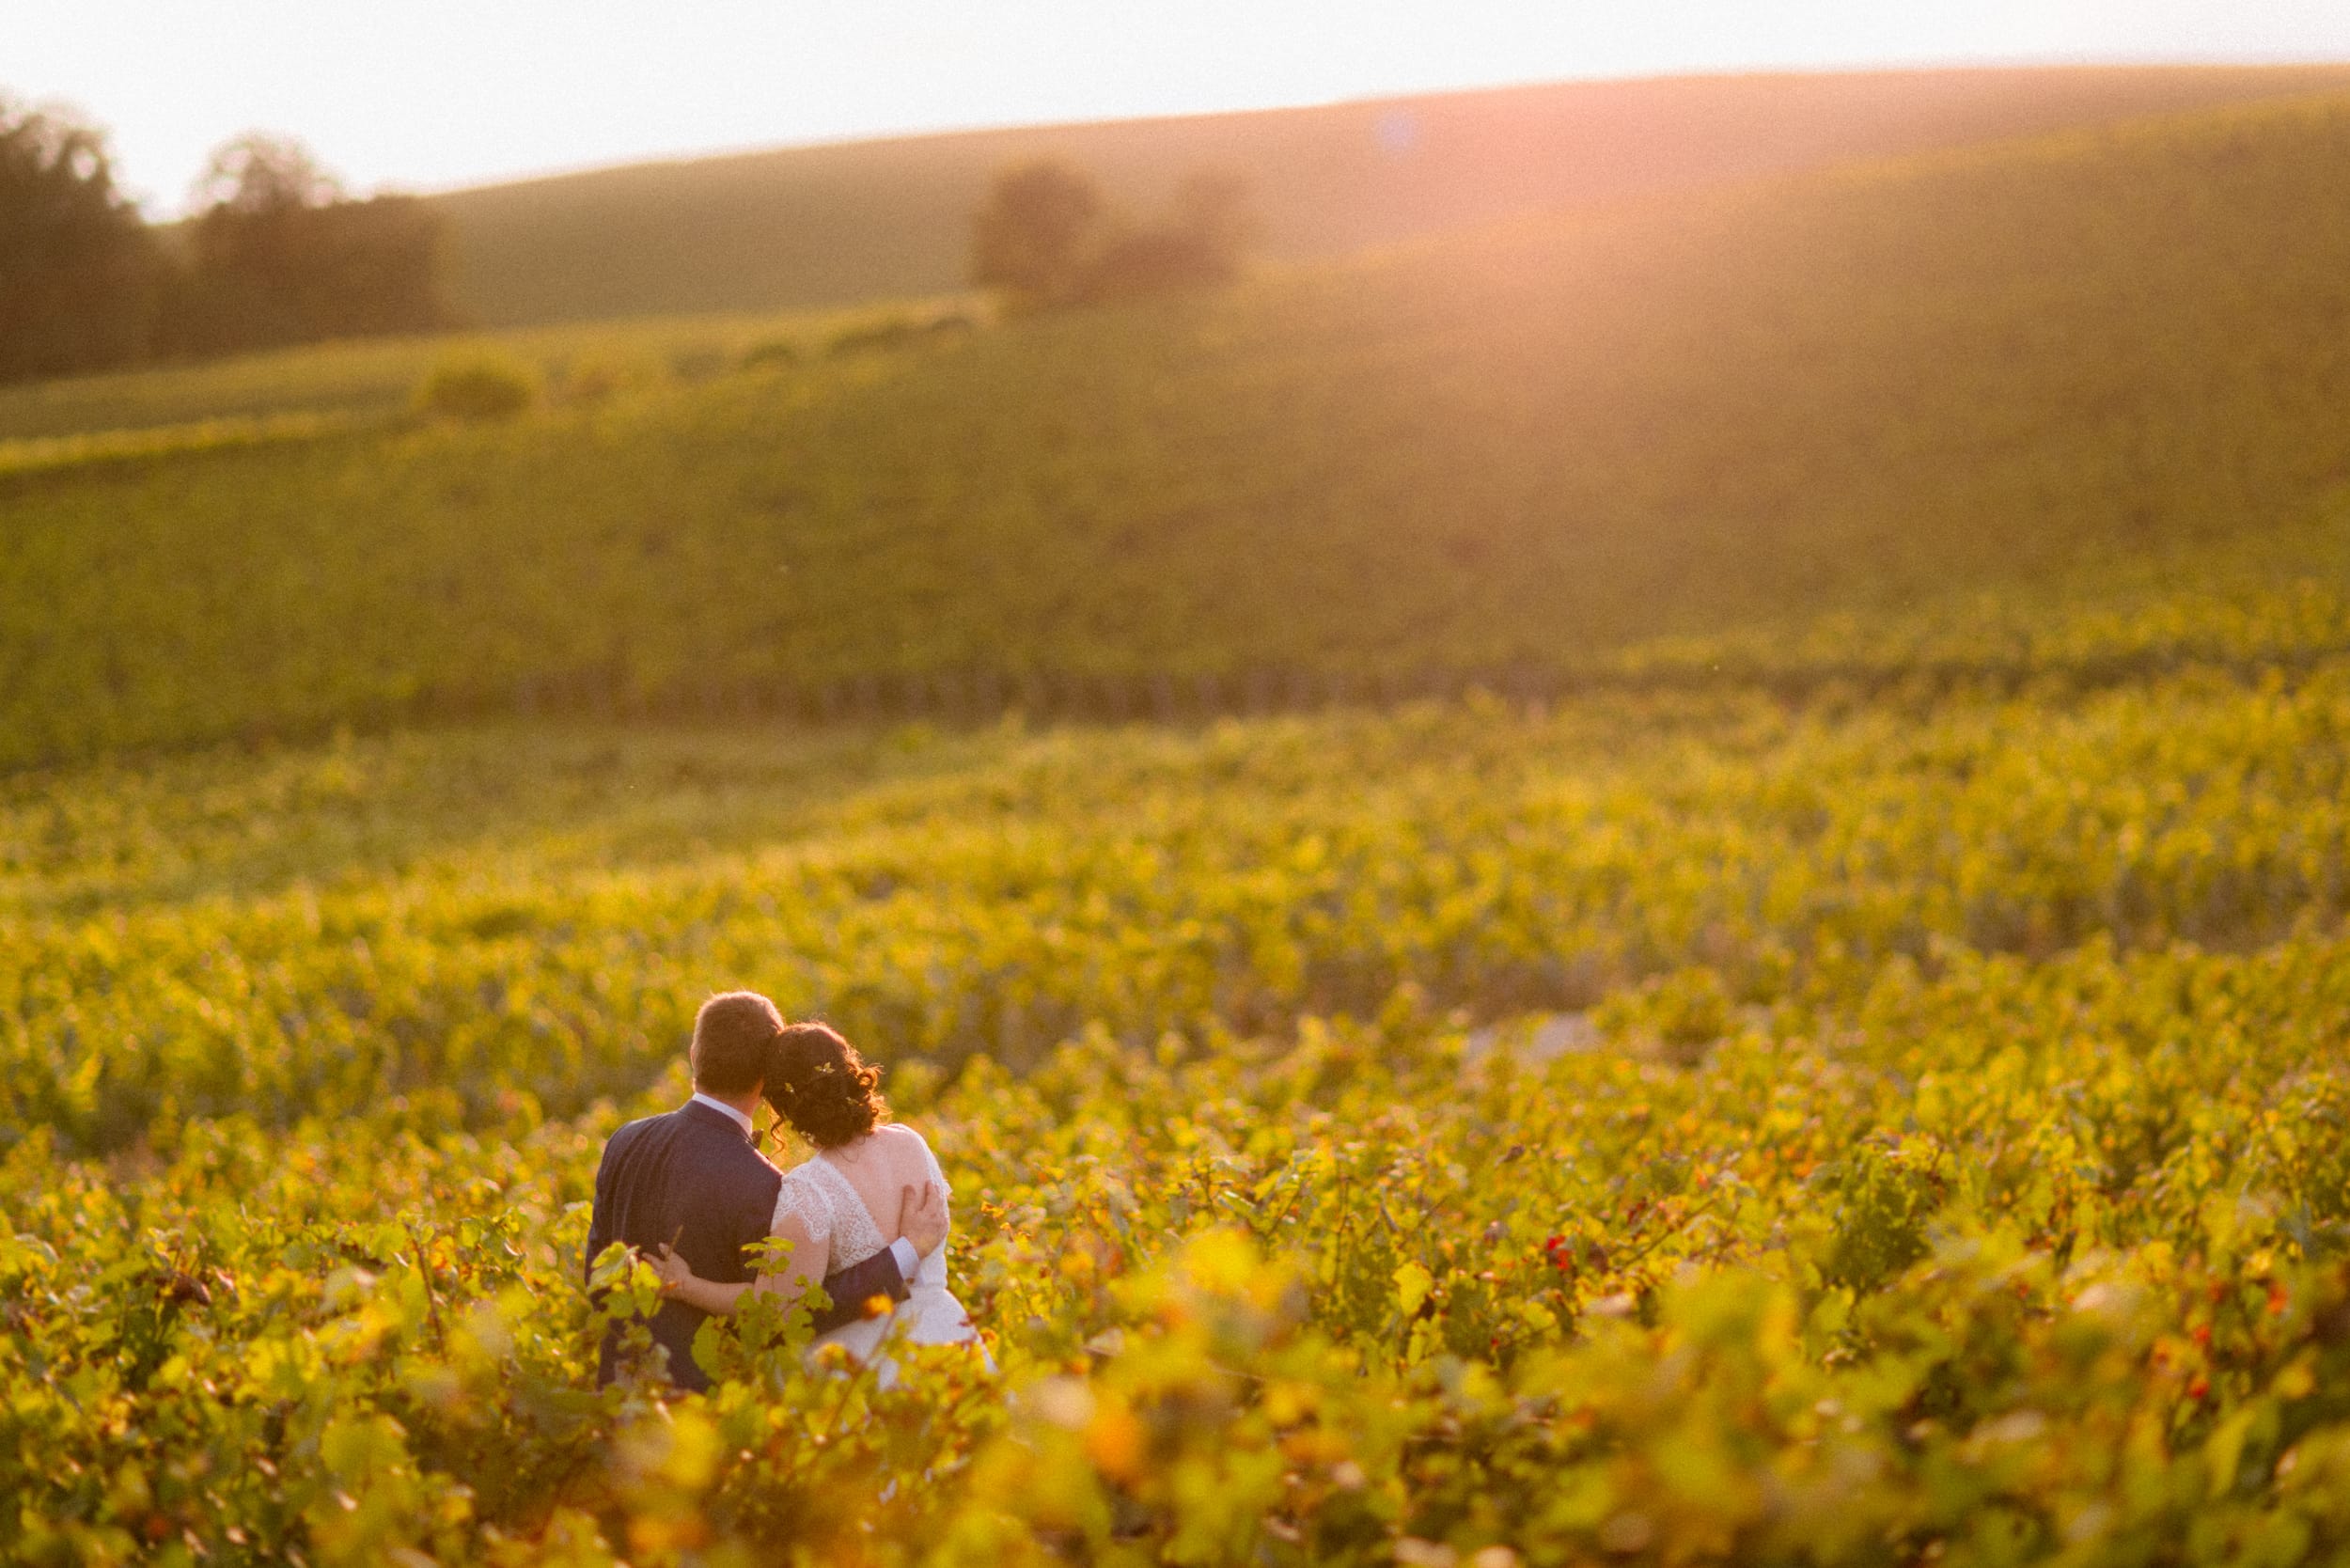 photographie de mariage realisee a epernay pres de reims en champagne ardenne